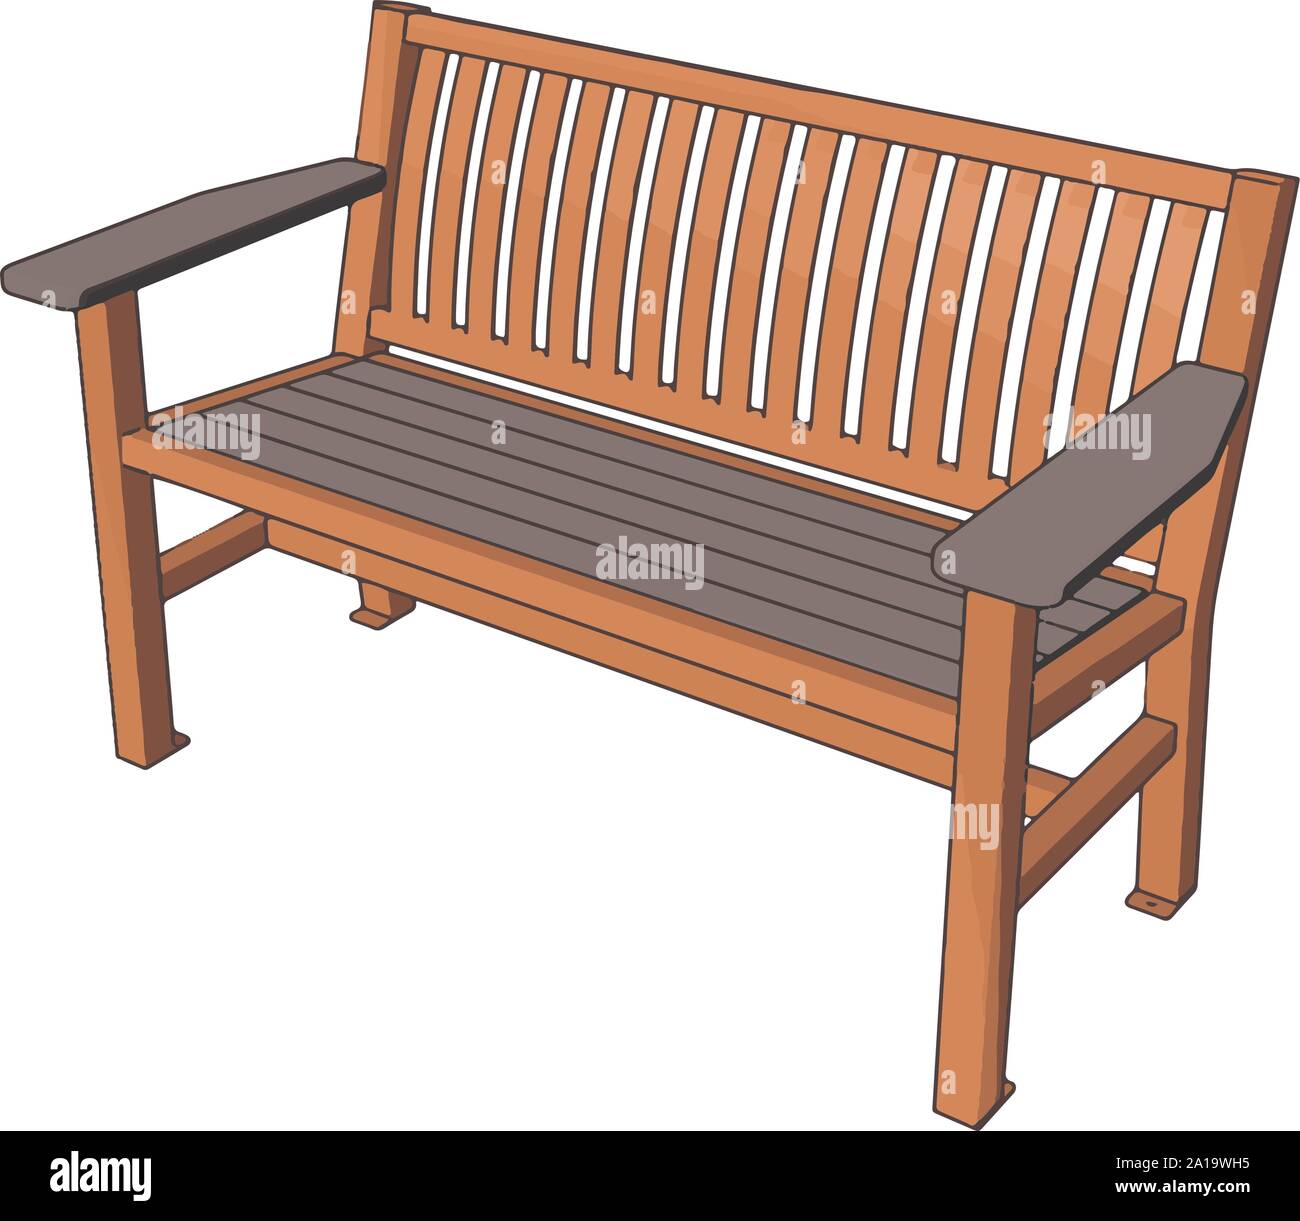 Brown bench, illustration, vector on white background. Stock Vector